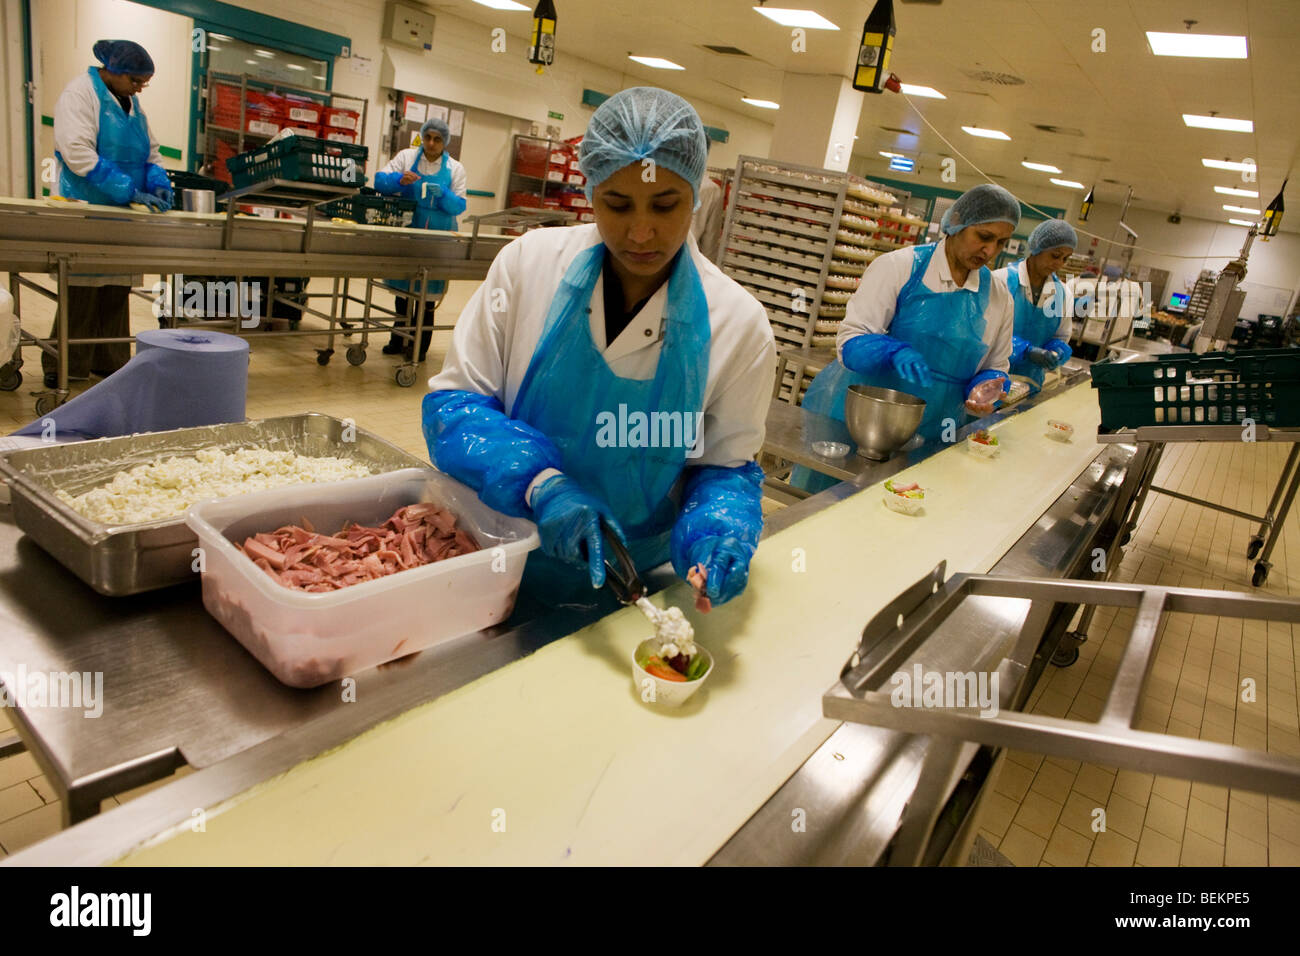 A production line of lady employees from Gate Gourmet prepare airline salad trays at Heathrow Airport. Stock Photo